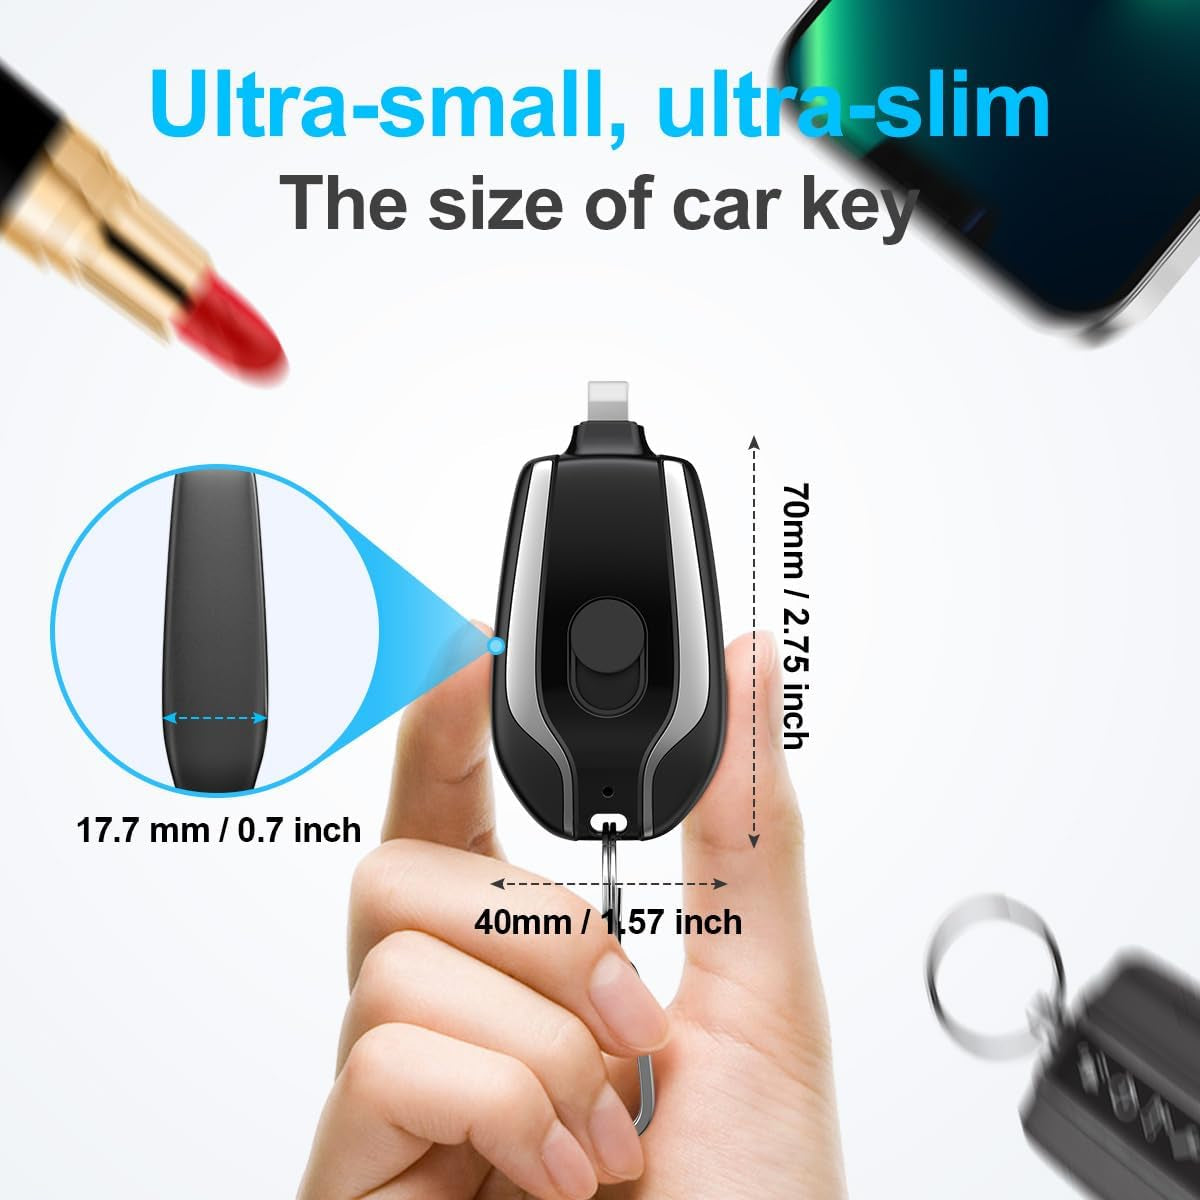 A Black Friday Deal Keychain Portable Charger for Iphone Cell Phone, 2000Mah Mini Power Emergency Pod, Ultra-Compact External Fast Charging Power Bank Battery Pack, Key Ring Cell Phone Charger,Small Charger for Airpods,Black